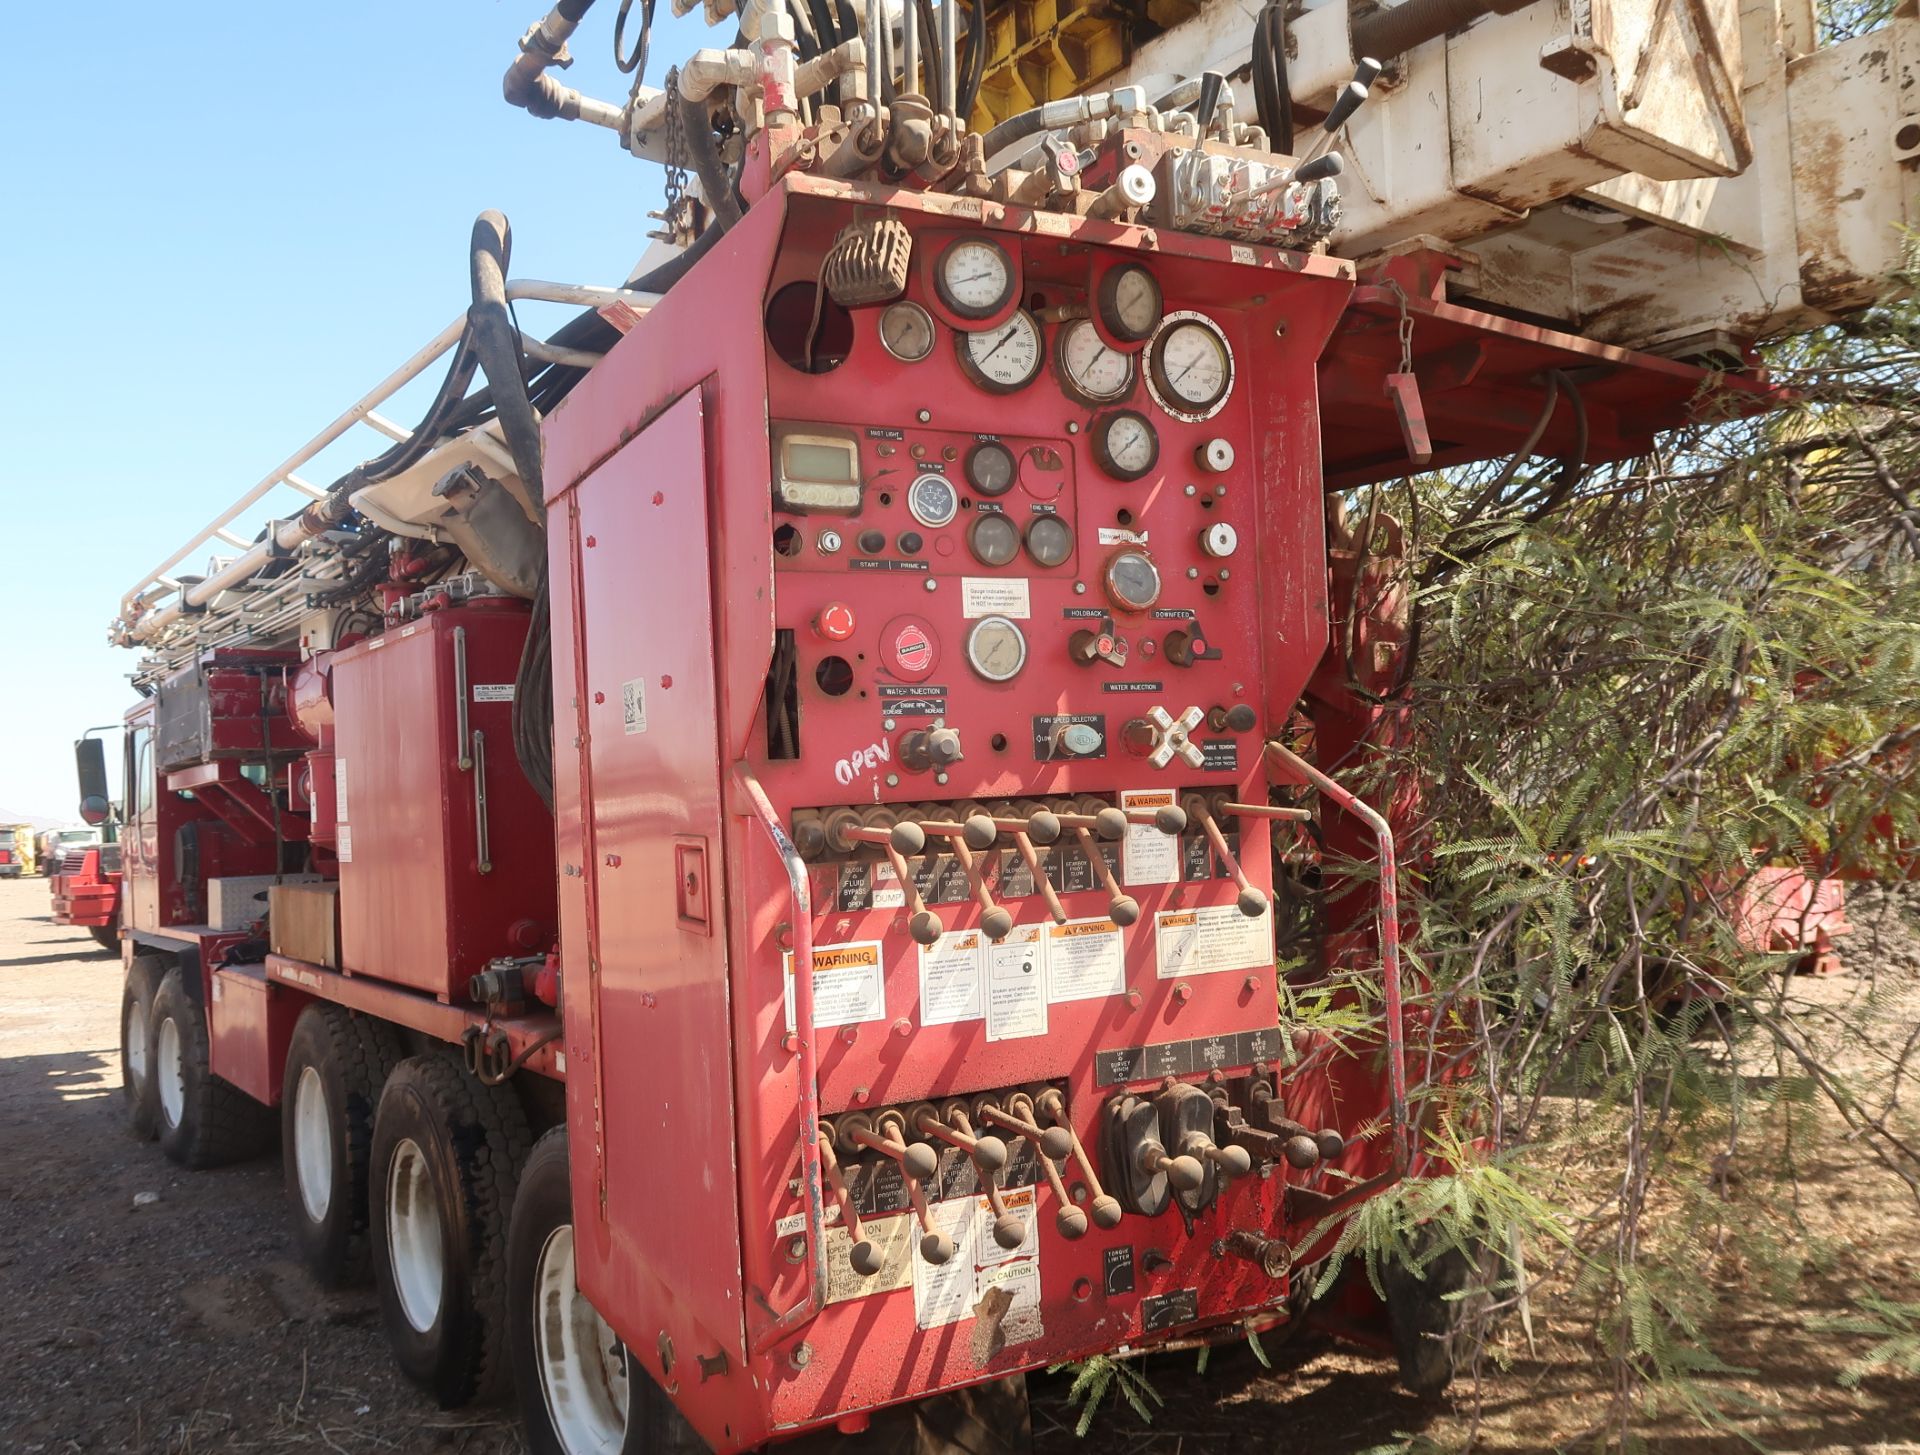 2006 SCHRAMM T-130XD DRILL RIG, SN. J130-0154 MOUNTED ON CRANE CARRIER, VIN. 1CYDGV6846T047562 - Image 13 of 19